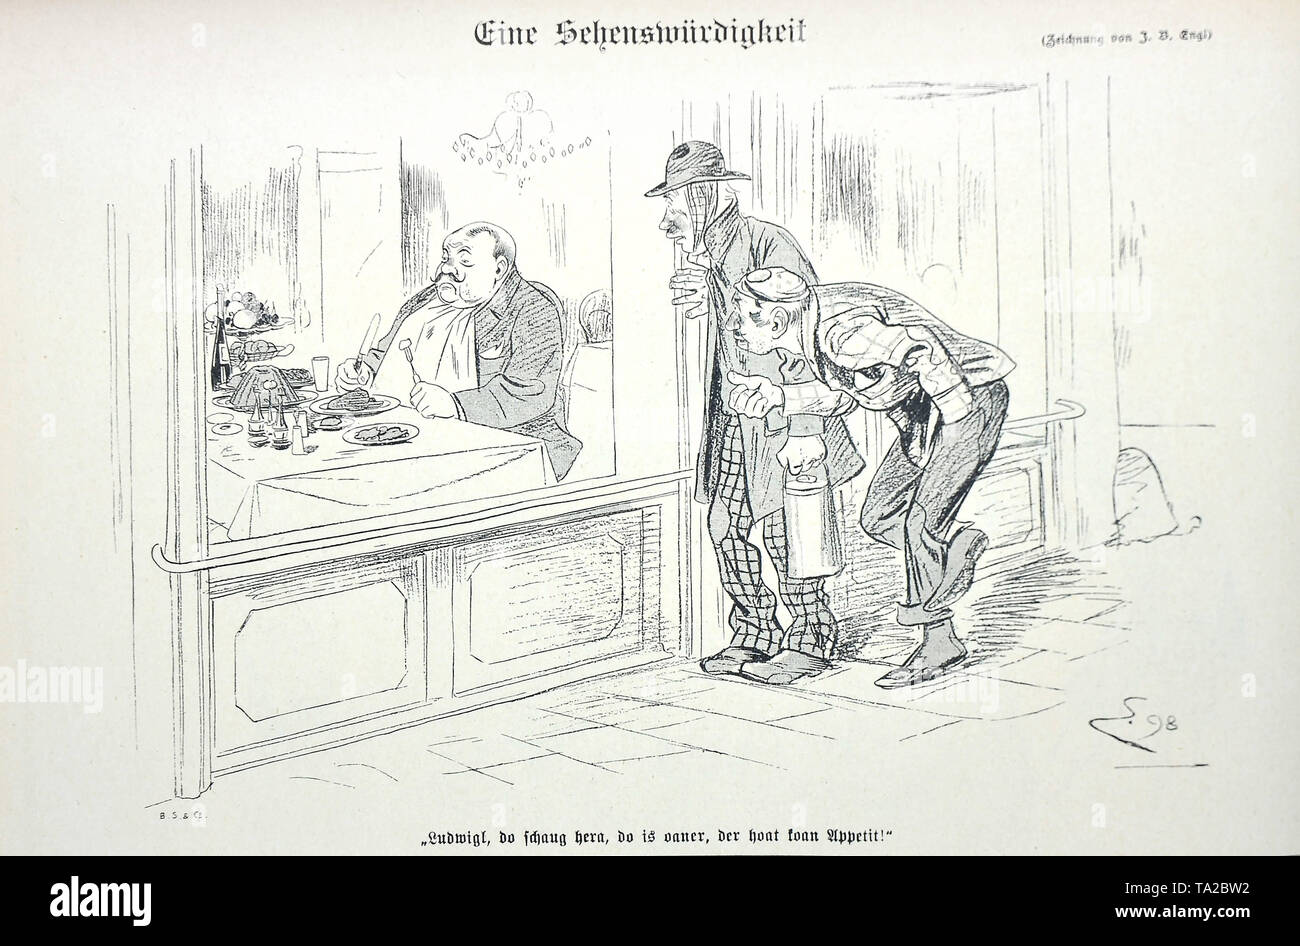 The drawing 'Eine Sehenswuerdigkeit' ('A sight') by Ferdinand von Reznicek. Cartoon from the satirical magazine 'Simplicissimus', Volume 4, Number 46 (1899). Under the picture: 'Ludwig, look, there is one who has no appetite!' Stock Photo